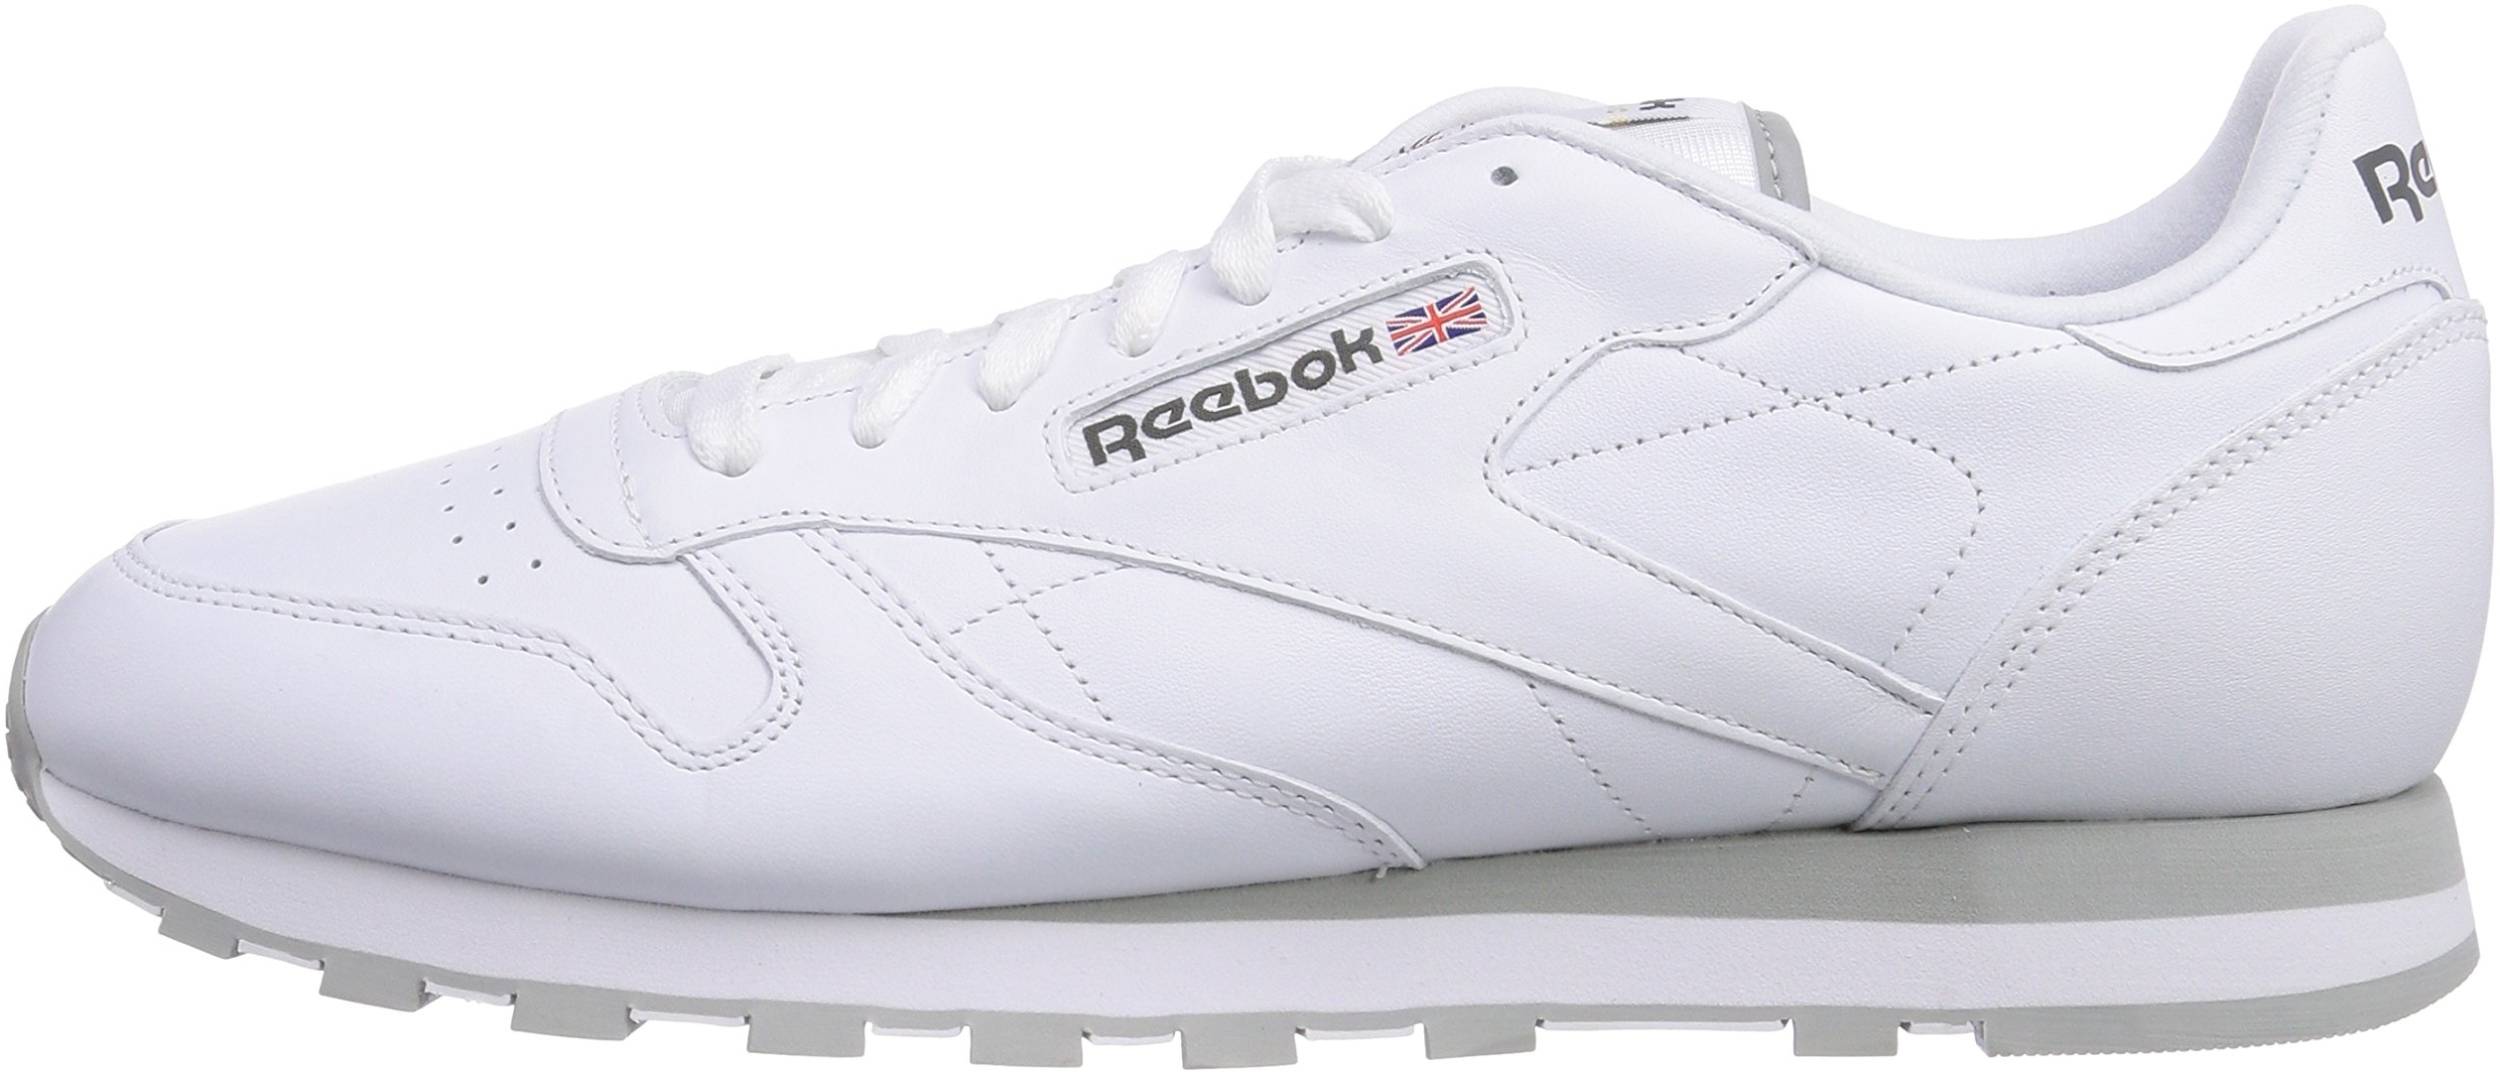 Reebok Classic Leather sneakers in 6 colors (only £33 